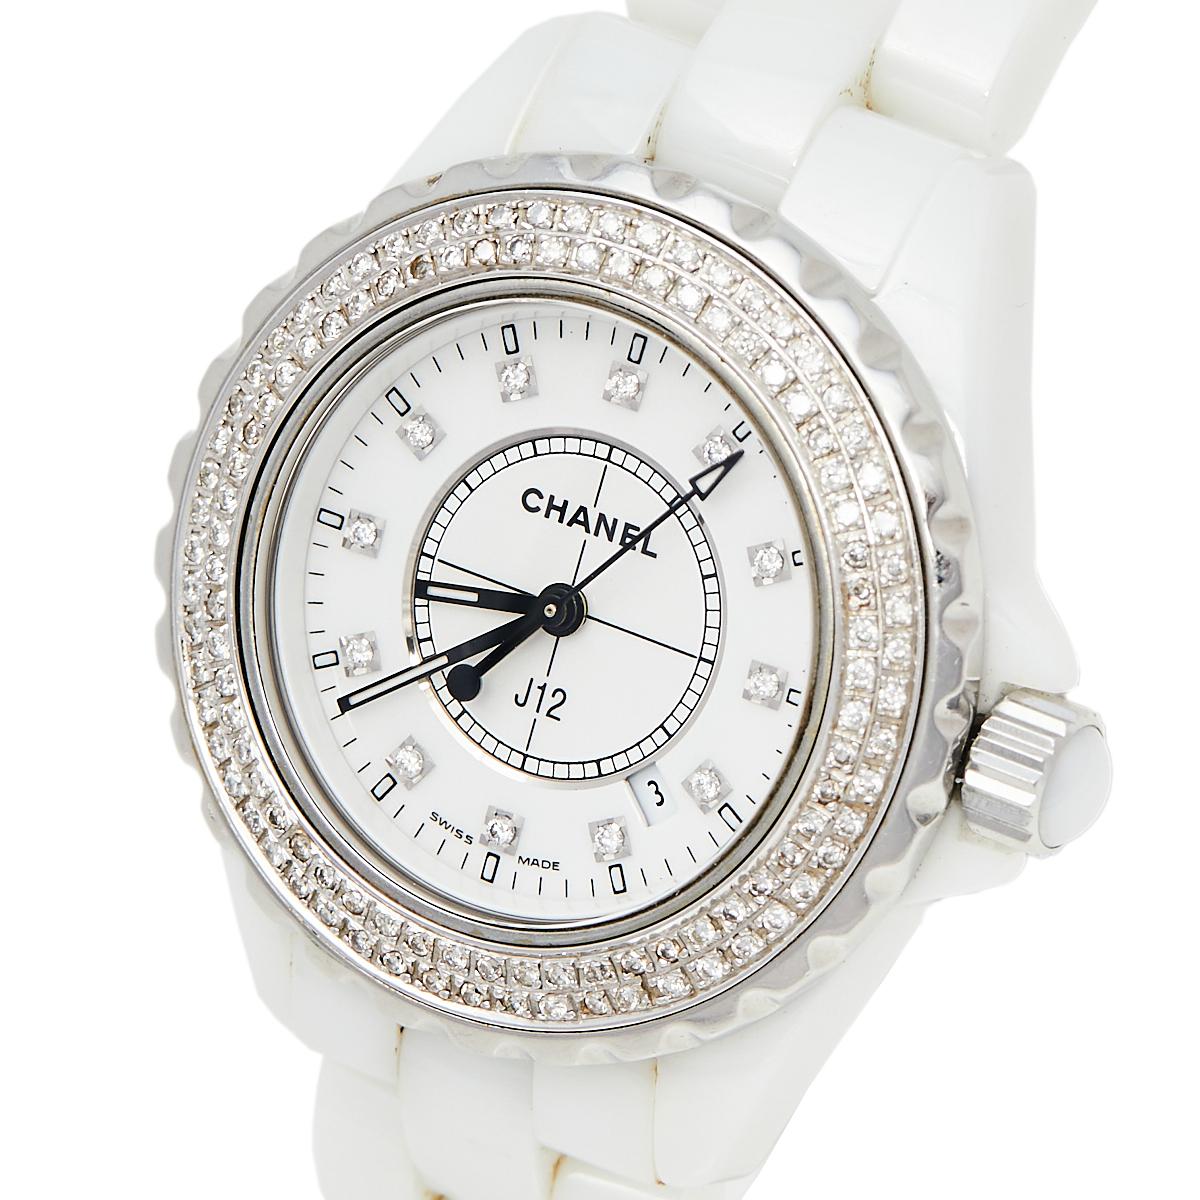 Flaunt this gorgeous timepiece by Chanel on your wrist and capture everyone's admiring glances. This wristwatch is made from stainless steel and ceramic. It has a diamond-embellished bezel and on the white dial, there are diamond hour markers and a